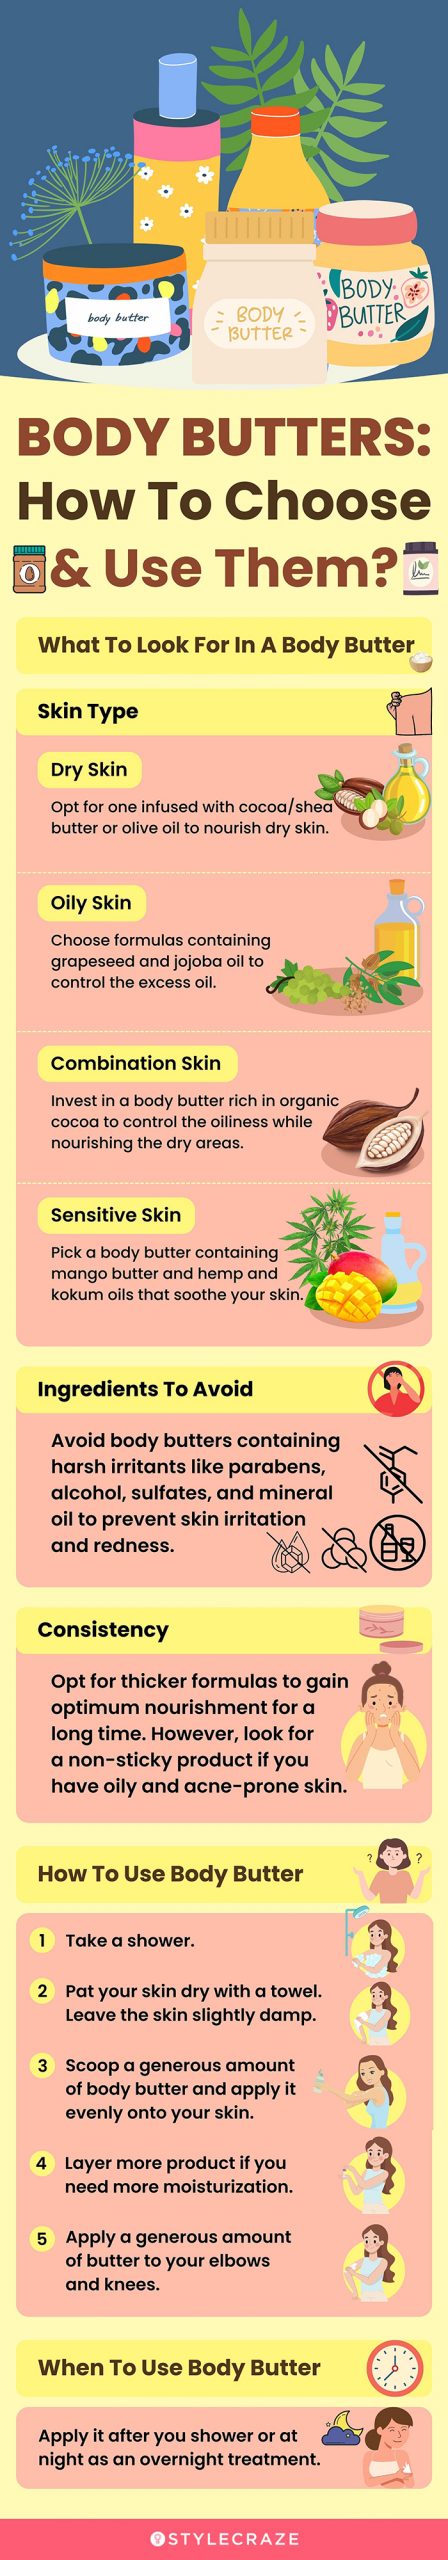 Body Butters: How To Choose and Use Them [infographic]